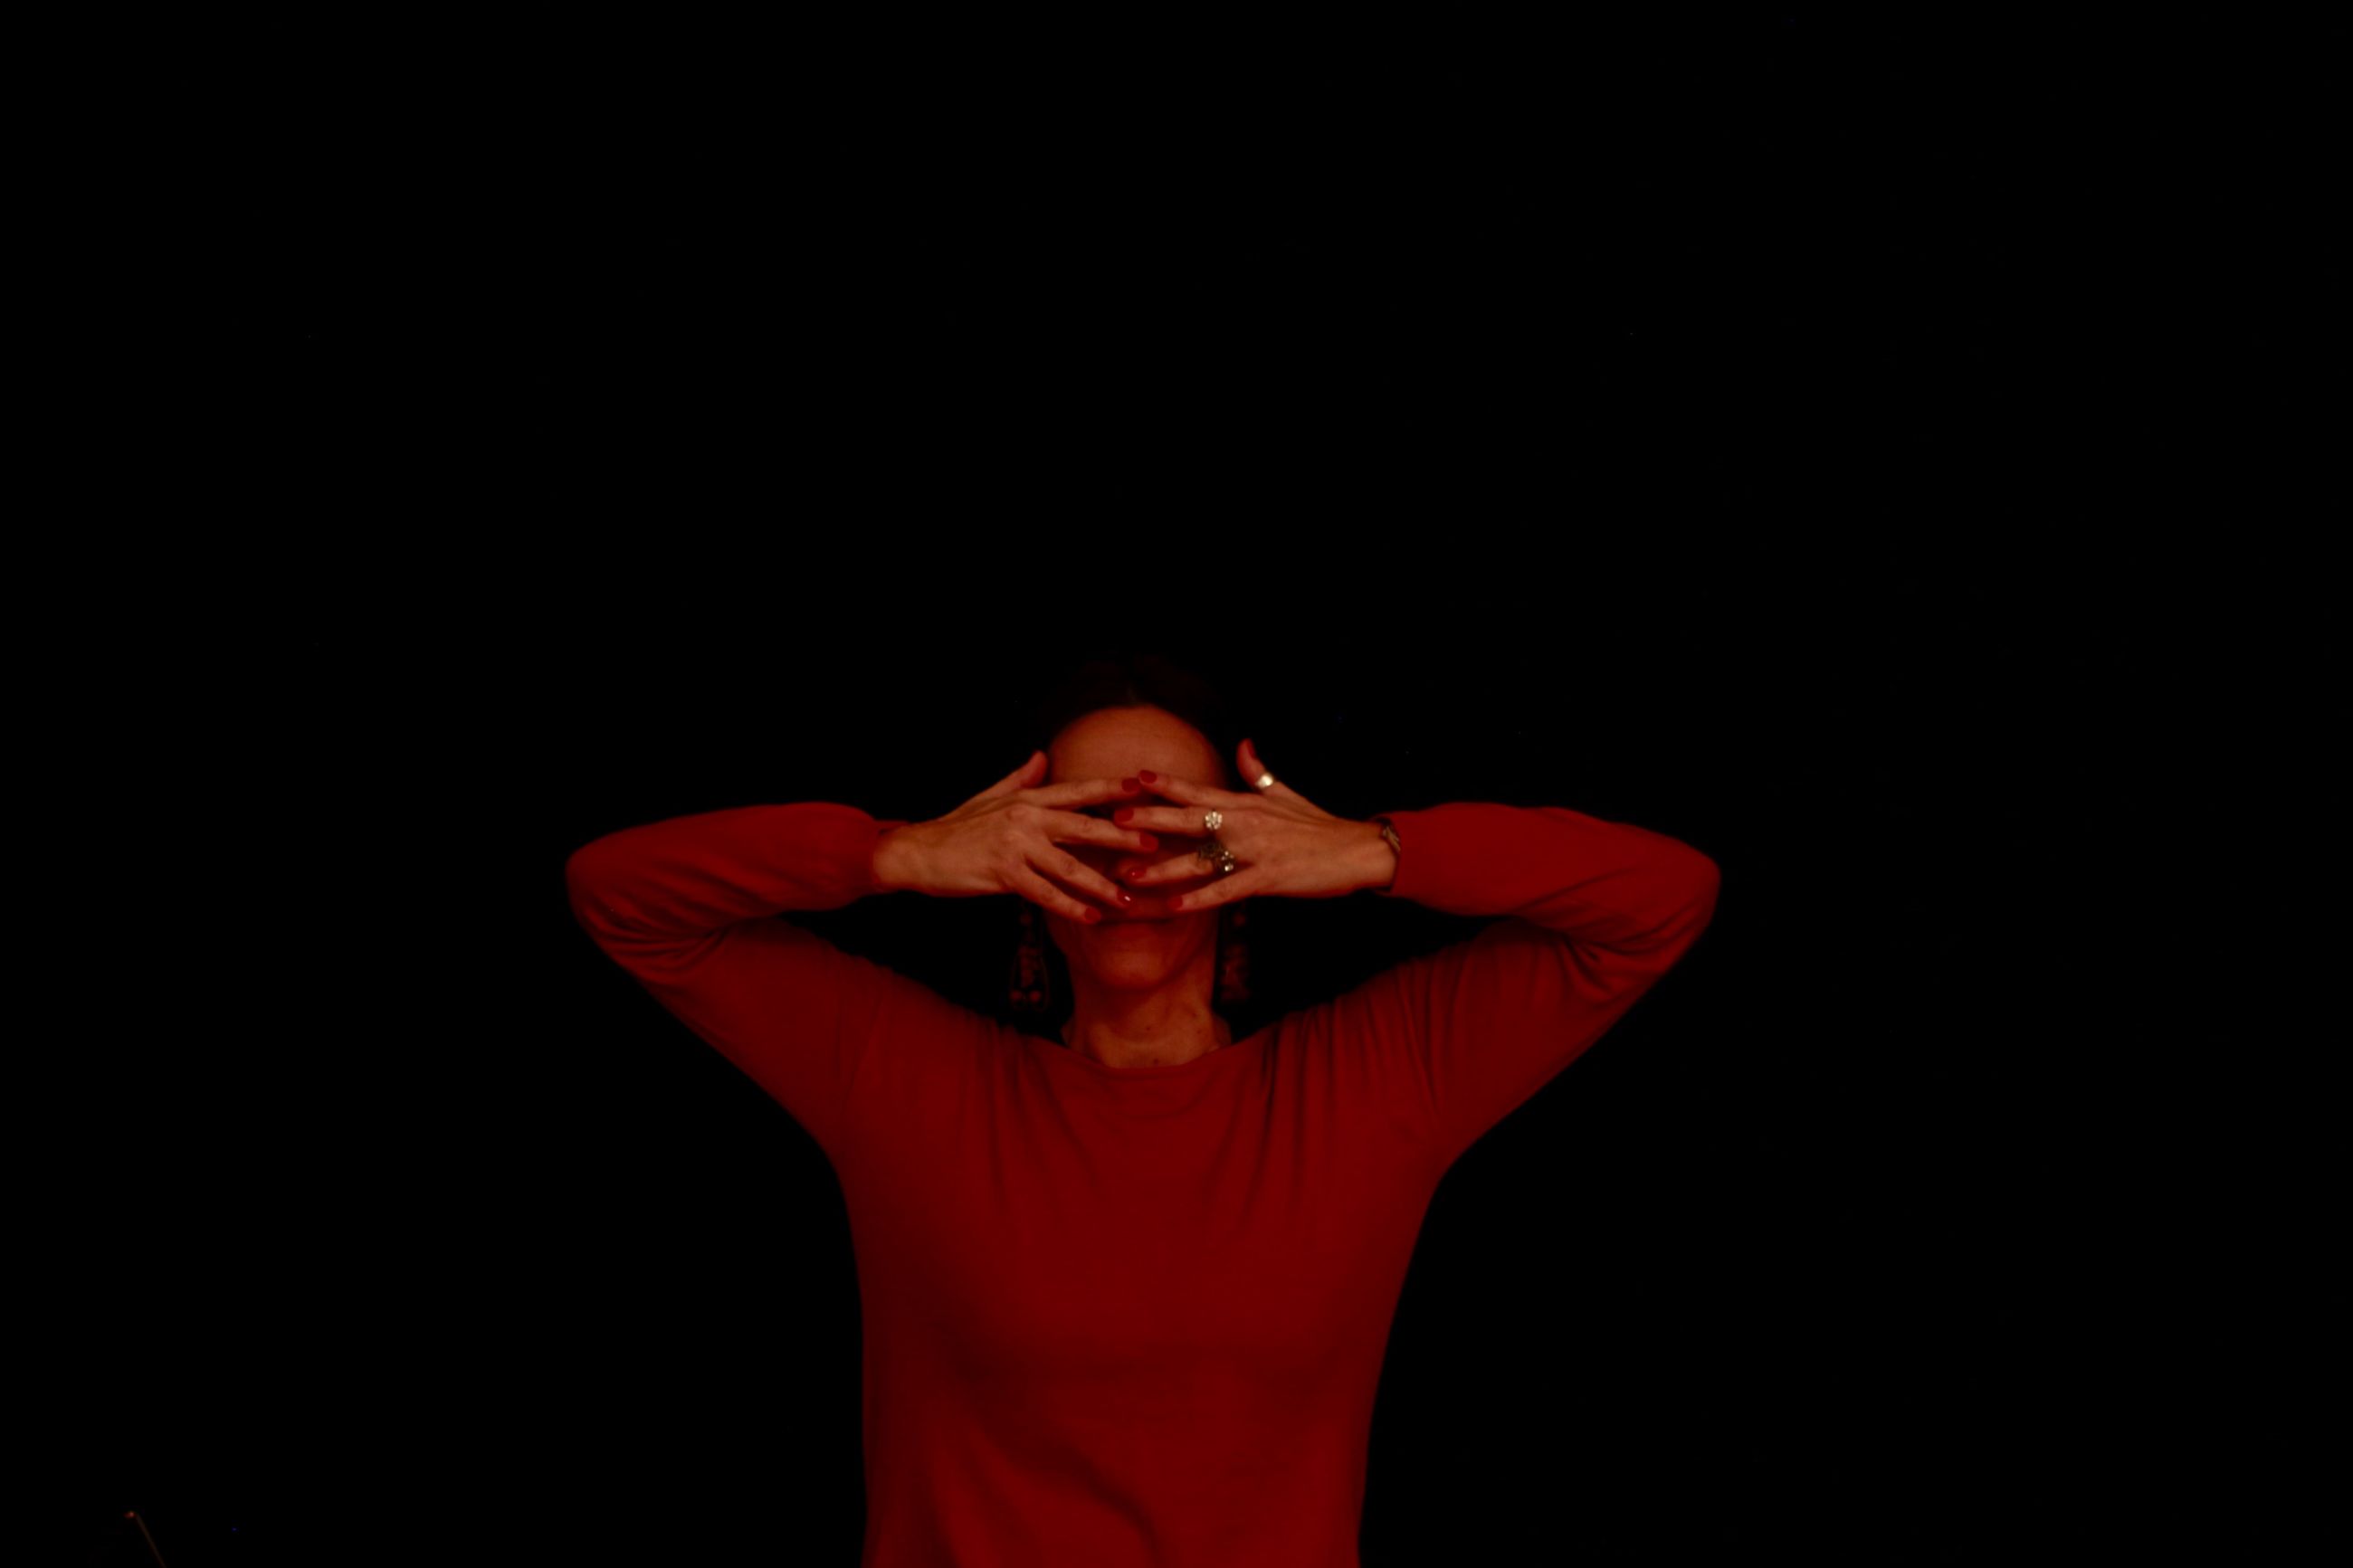 black background, studio shot, one person, indoors, front view, copy space, red, standing, waist up, casual clothing, young adult, cut out, emotion, adult, lifestyles, obscured face, hand, sadness, women, human arm, arms raised, depression - sadness, hairstyle